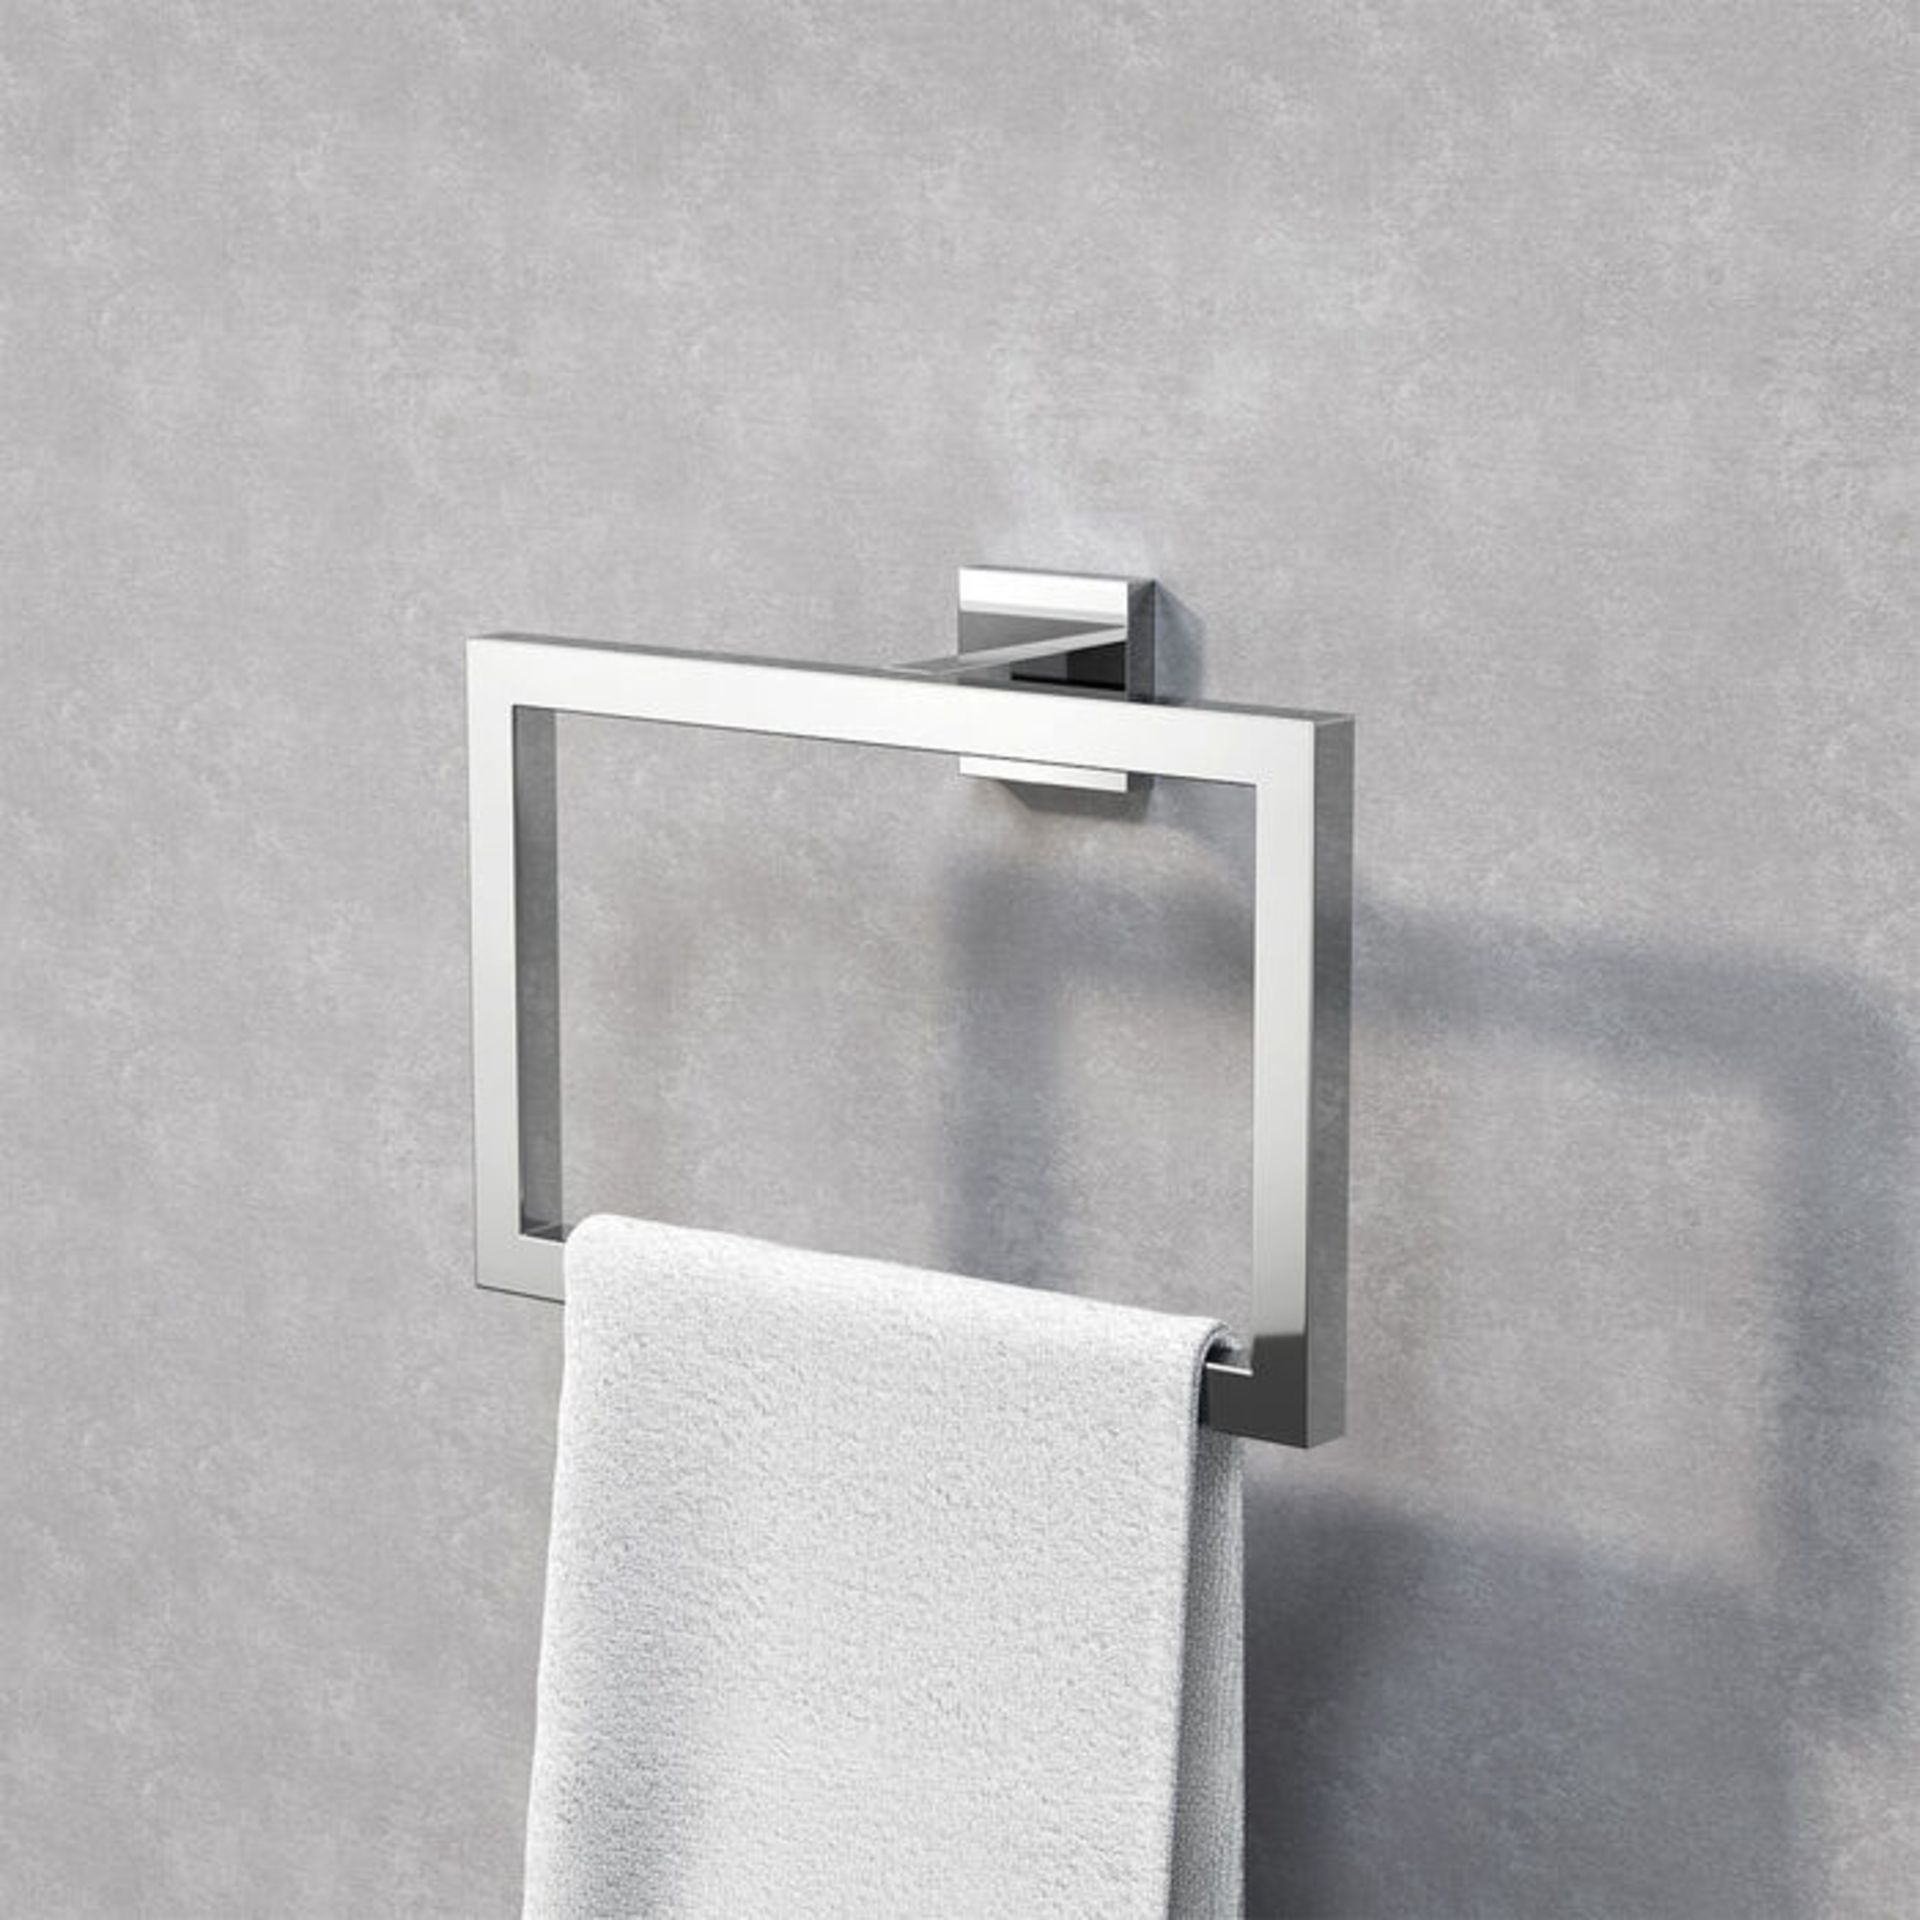 (SU1043) Jesmond Towel Ring Finishes your bathroom with a little extra functionality and style...